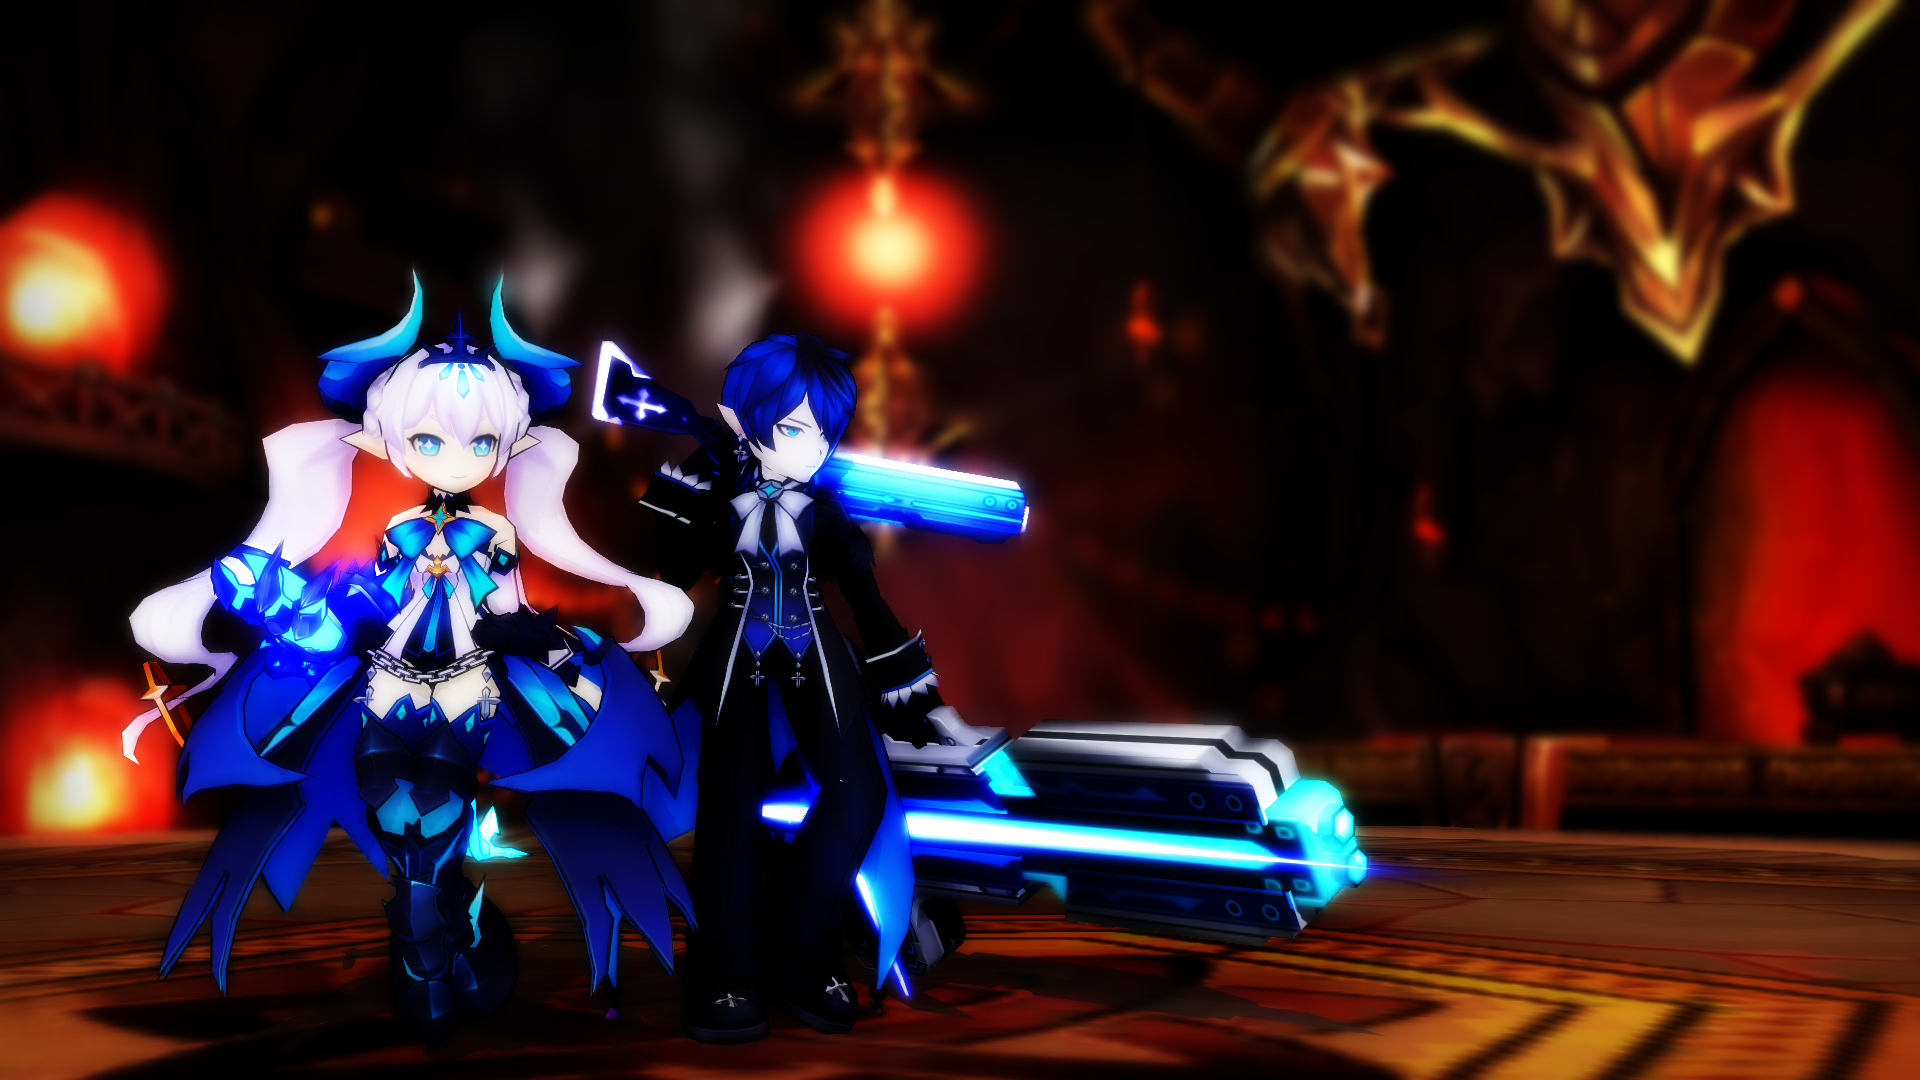 Elsword Lu Ciel Noblesse And Royal Guard By Diabolicturkey On